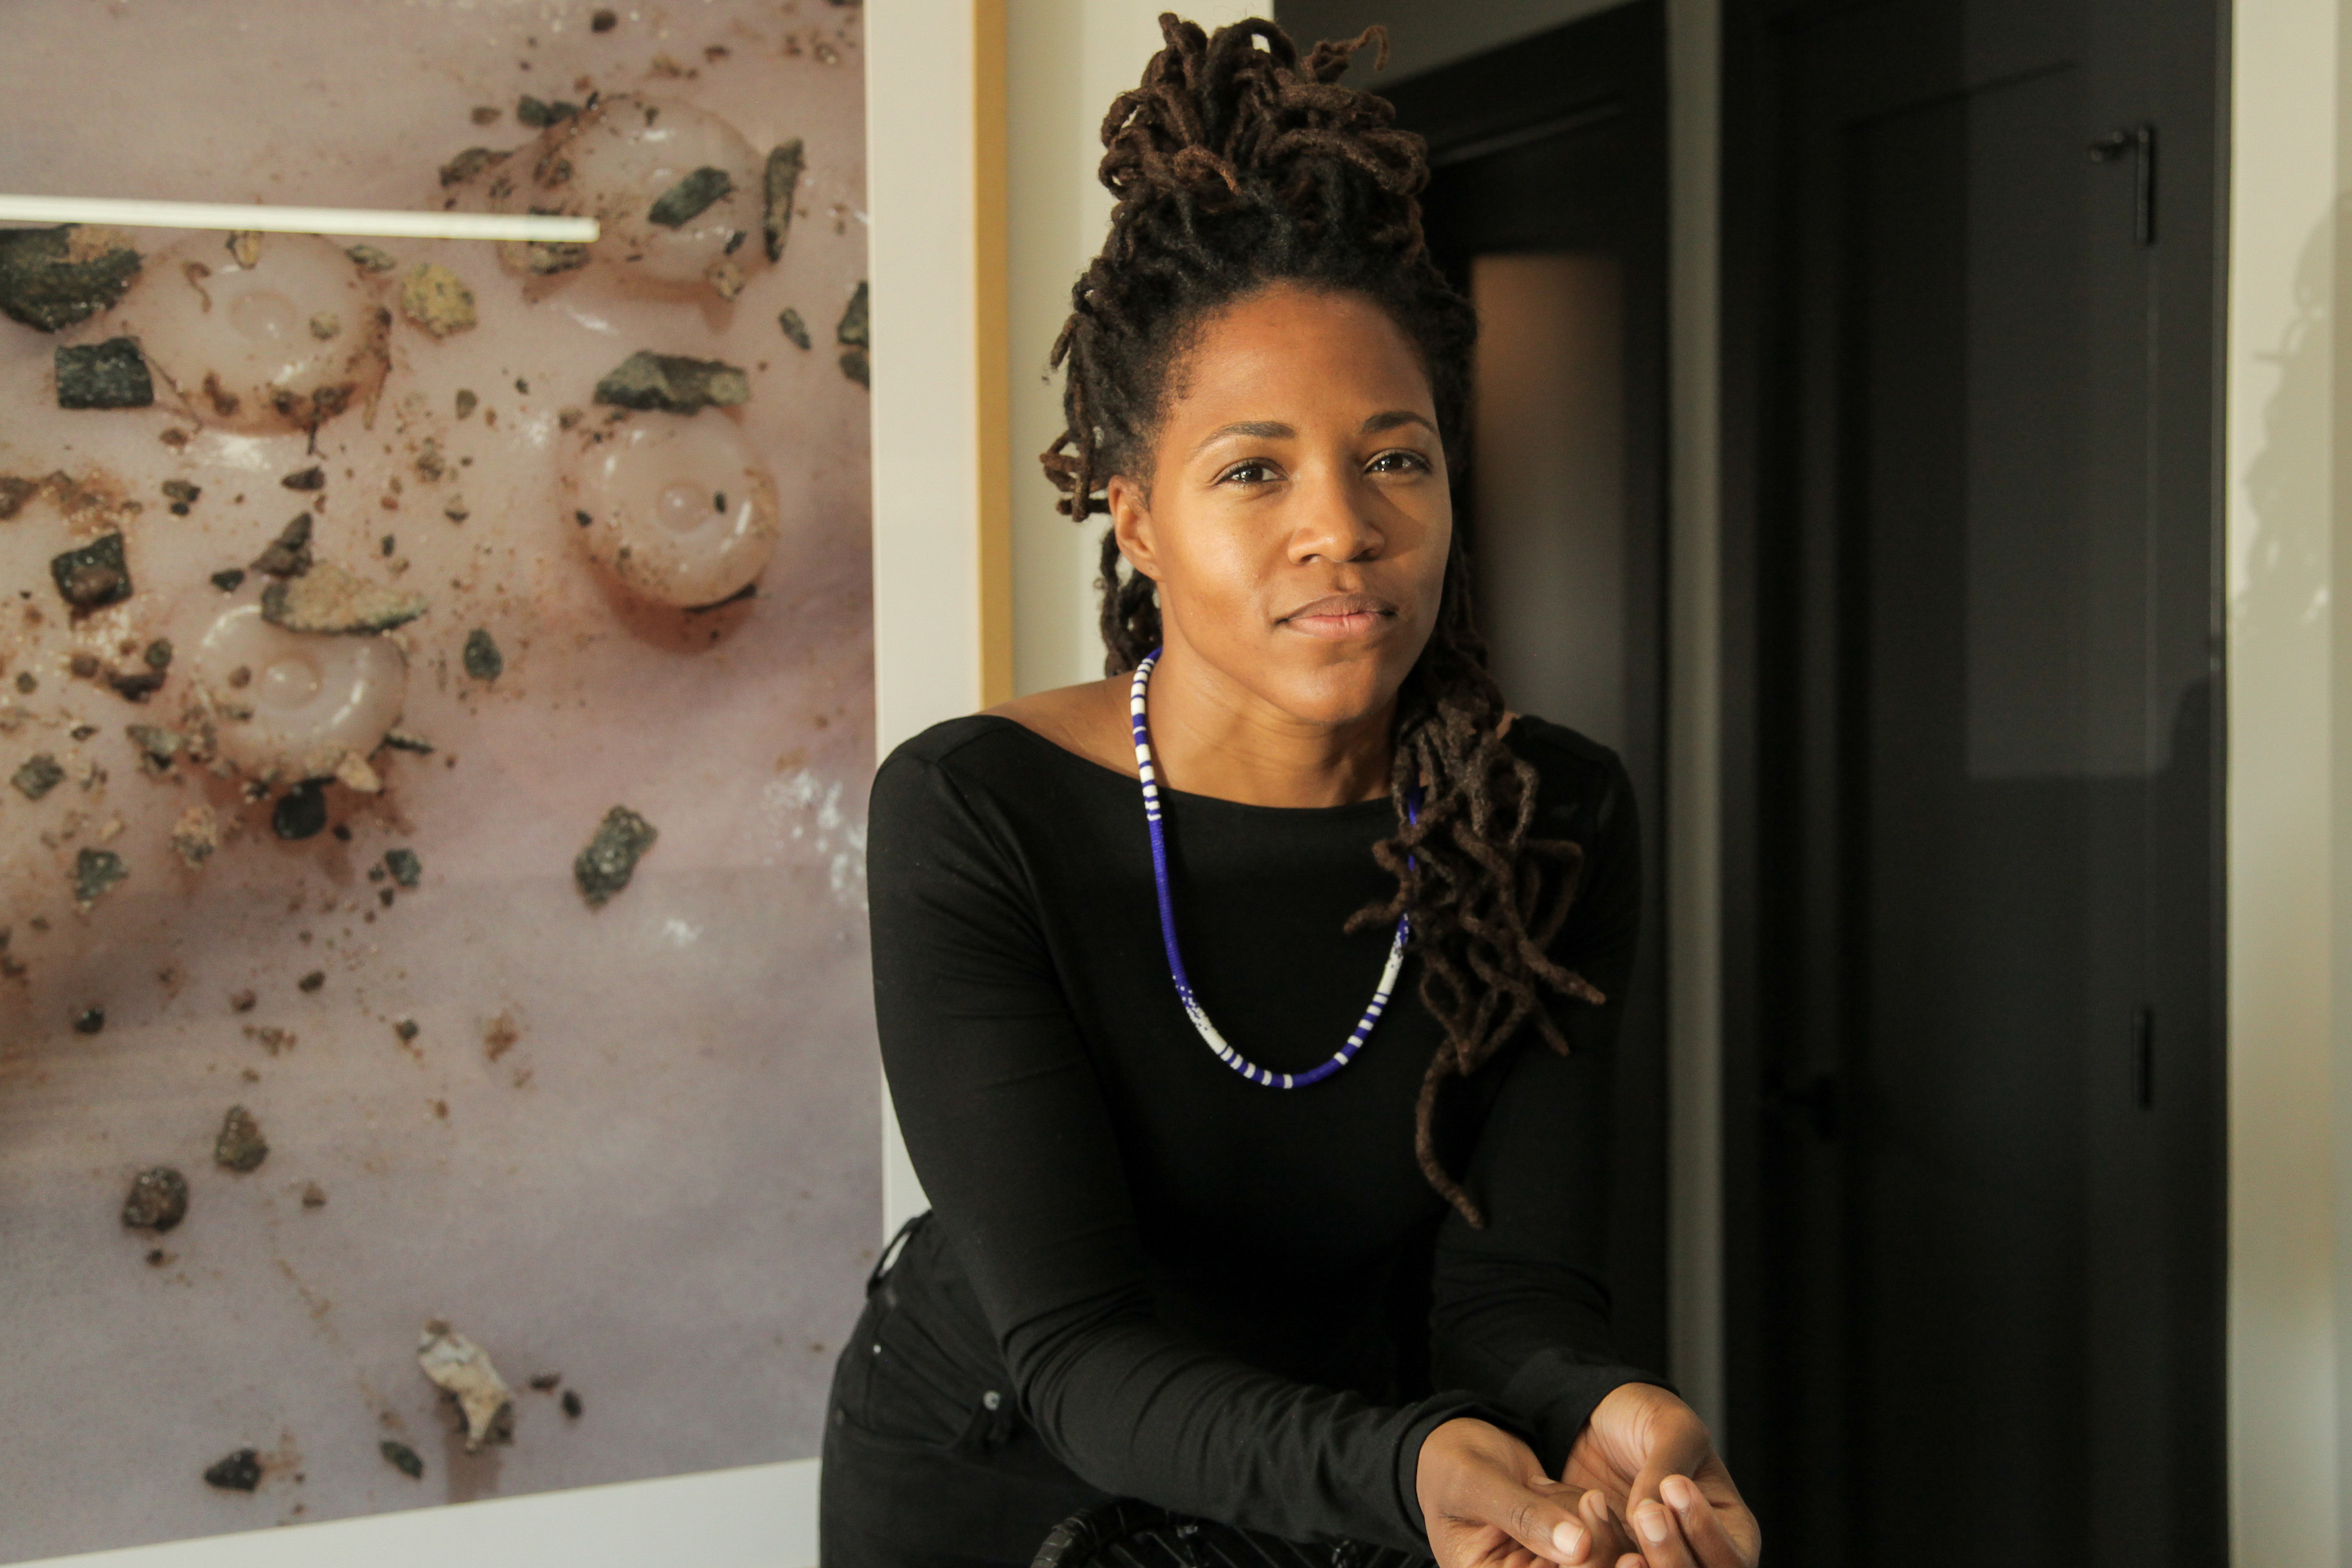 Saretta, a young black woman in a black shirt and Blue and White beaded necklace, leans forward resting her elbows on the back of a stool. She almost smiles. Behind her hangs a large photograph of a squid tentacle.